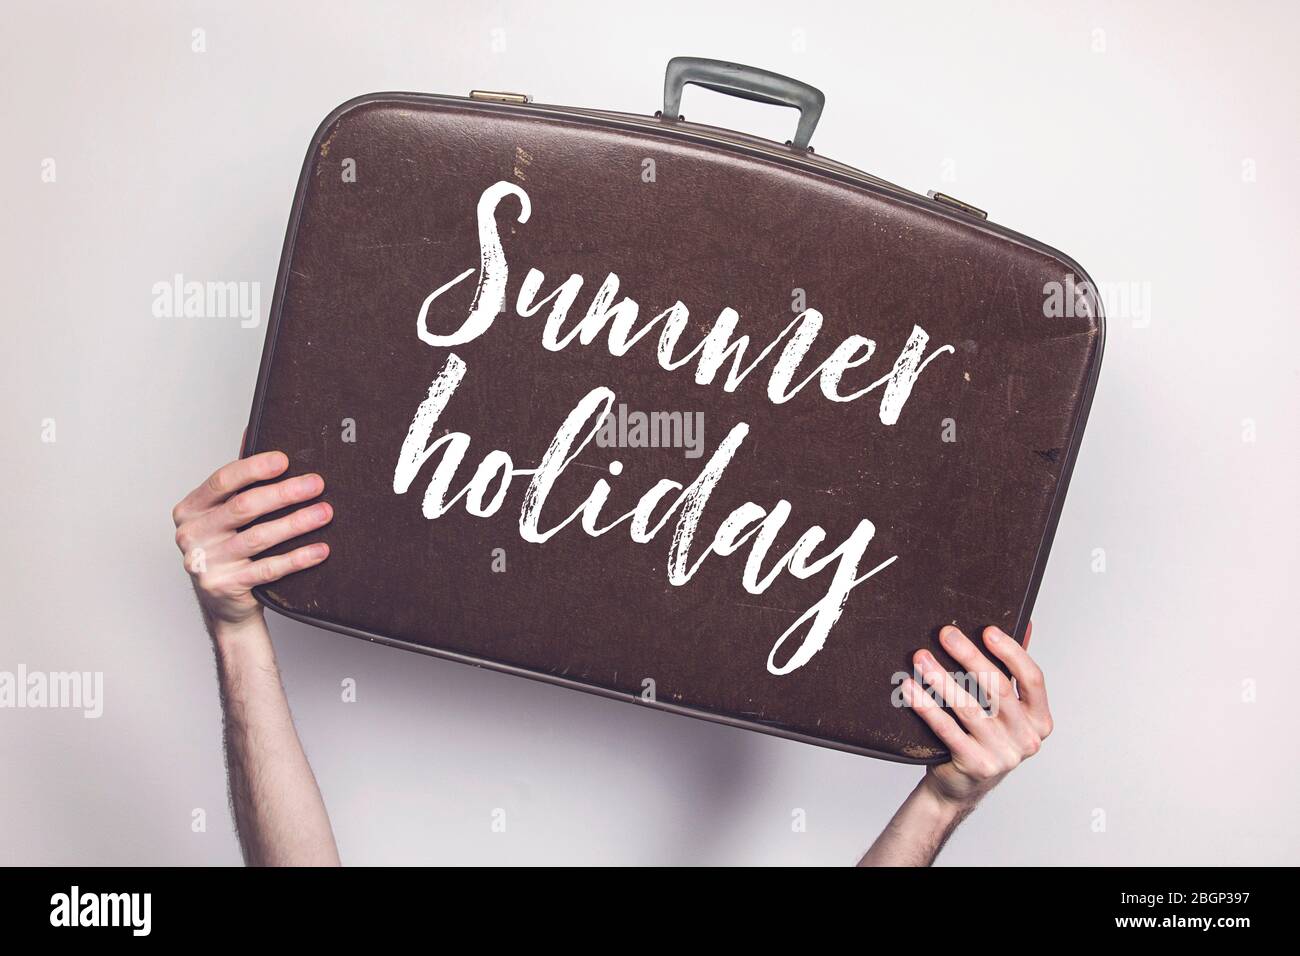 Summer holiday message on a vintage travel suitcase Stock Photo